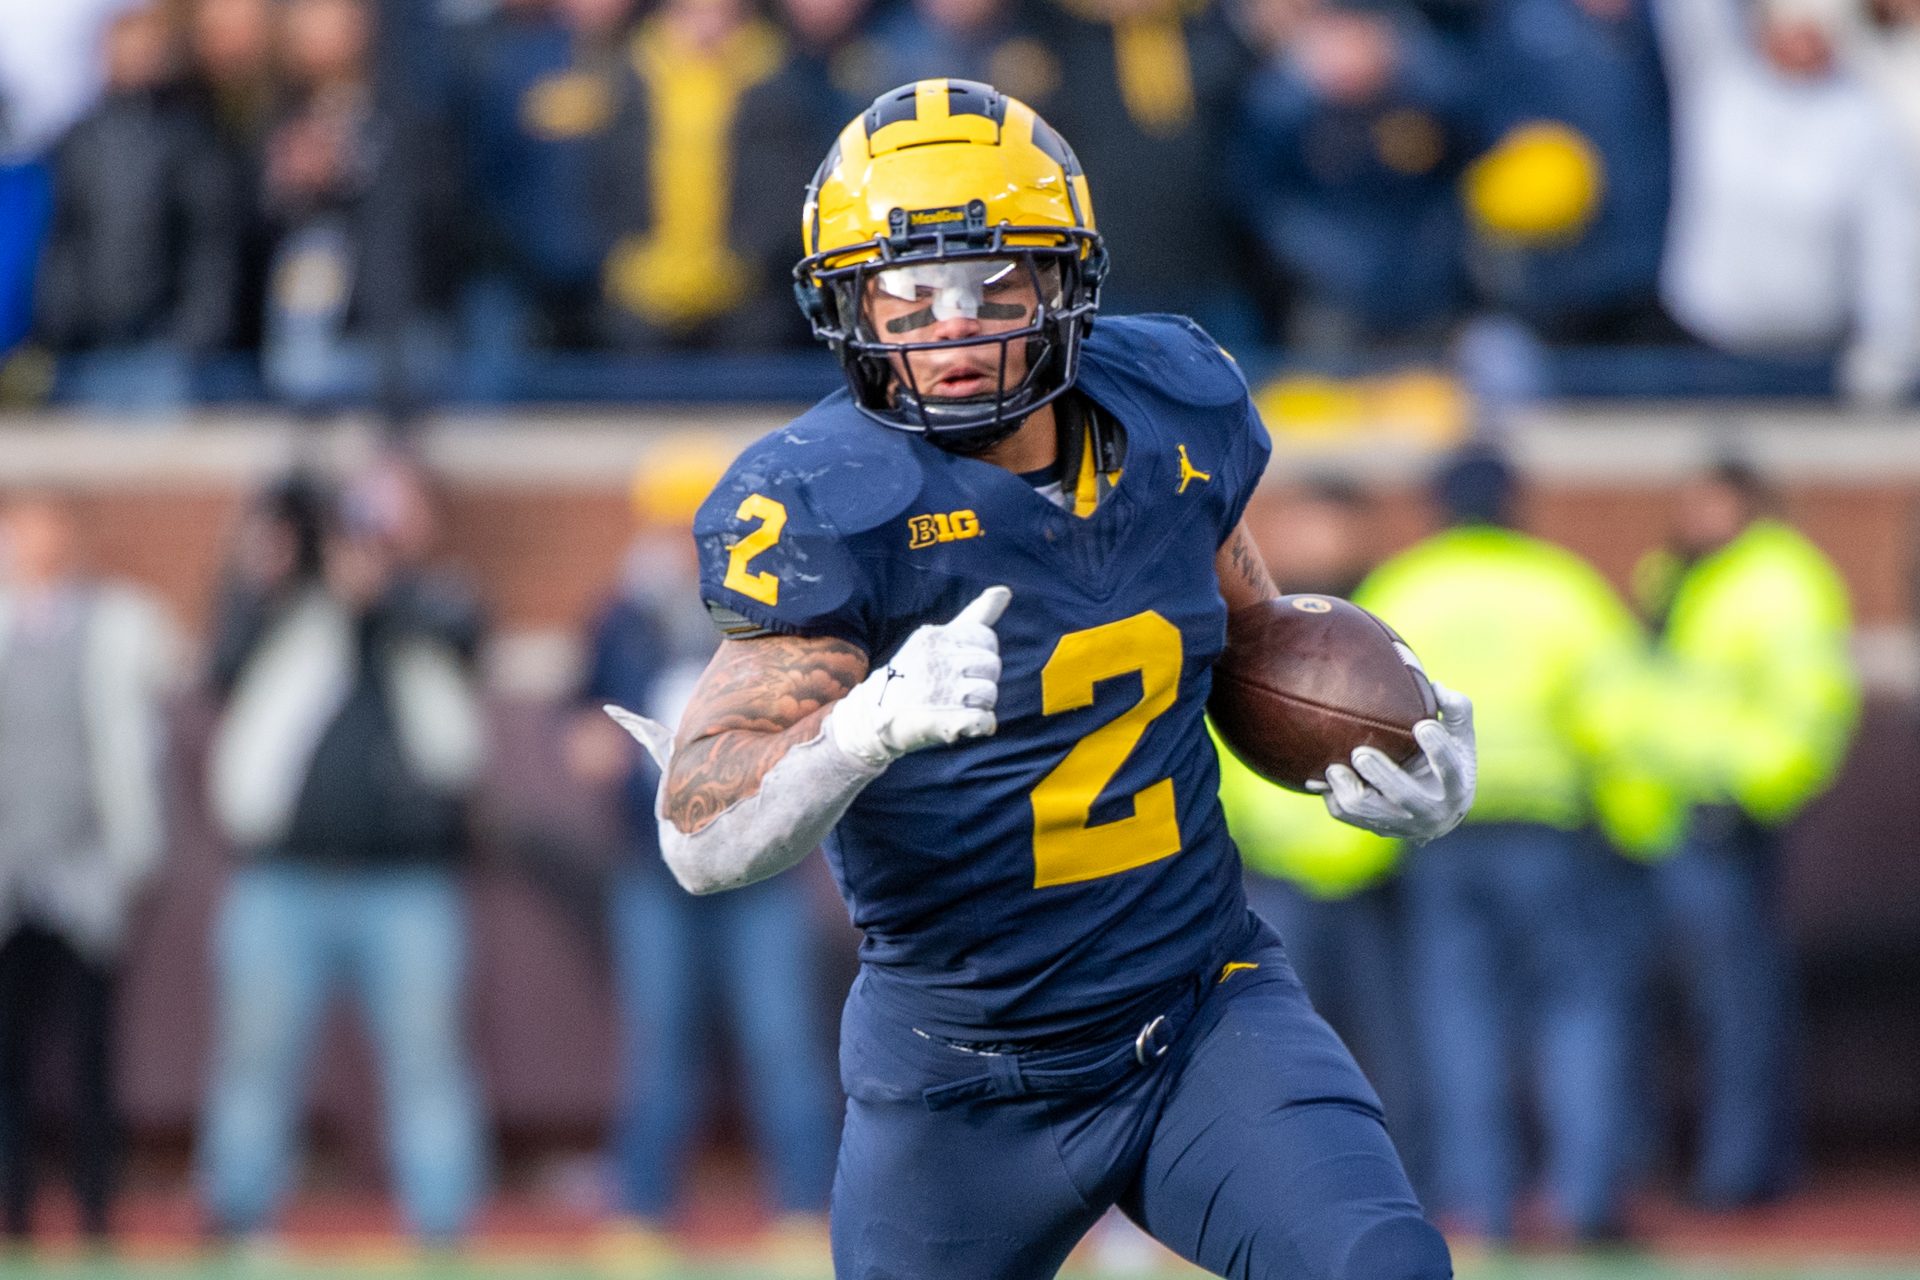 How Michigan’s sign-stealing scandal has affected their football program